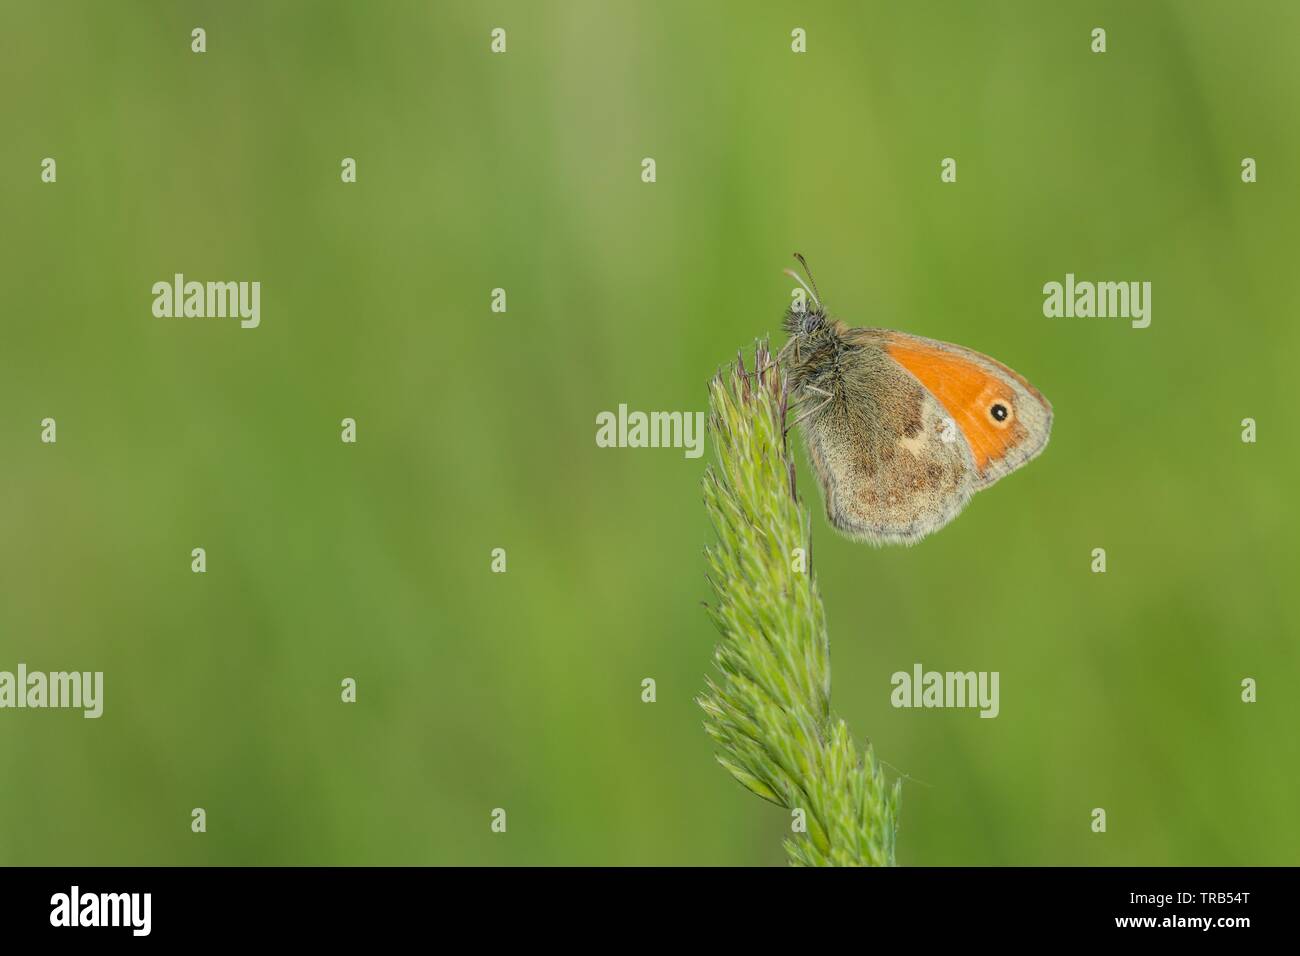 A small orange and brown butterfly with a black dot, a small heath, sitting on a top of grass. Sunny summer day in nature. Blurry green background. Stock Photo